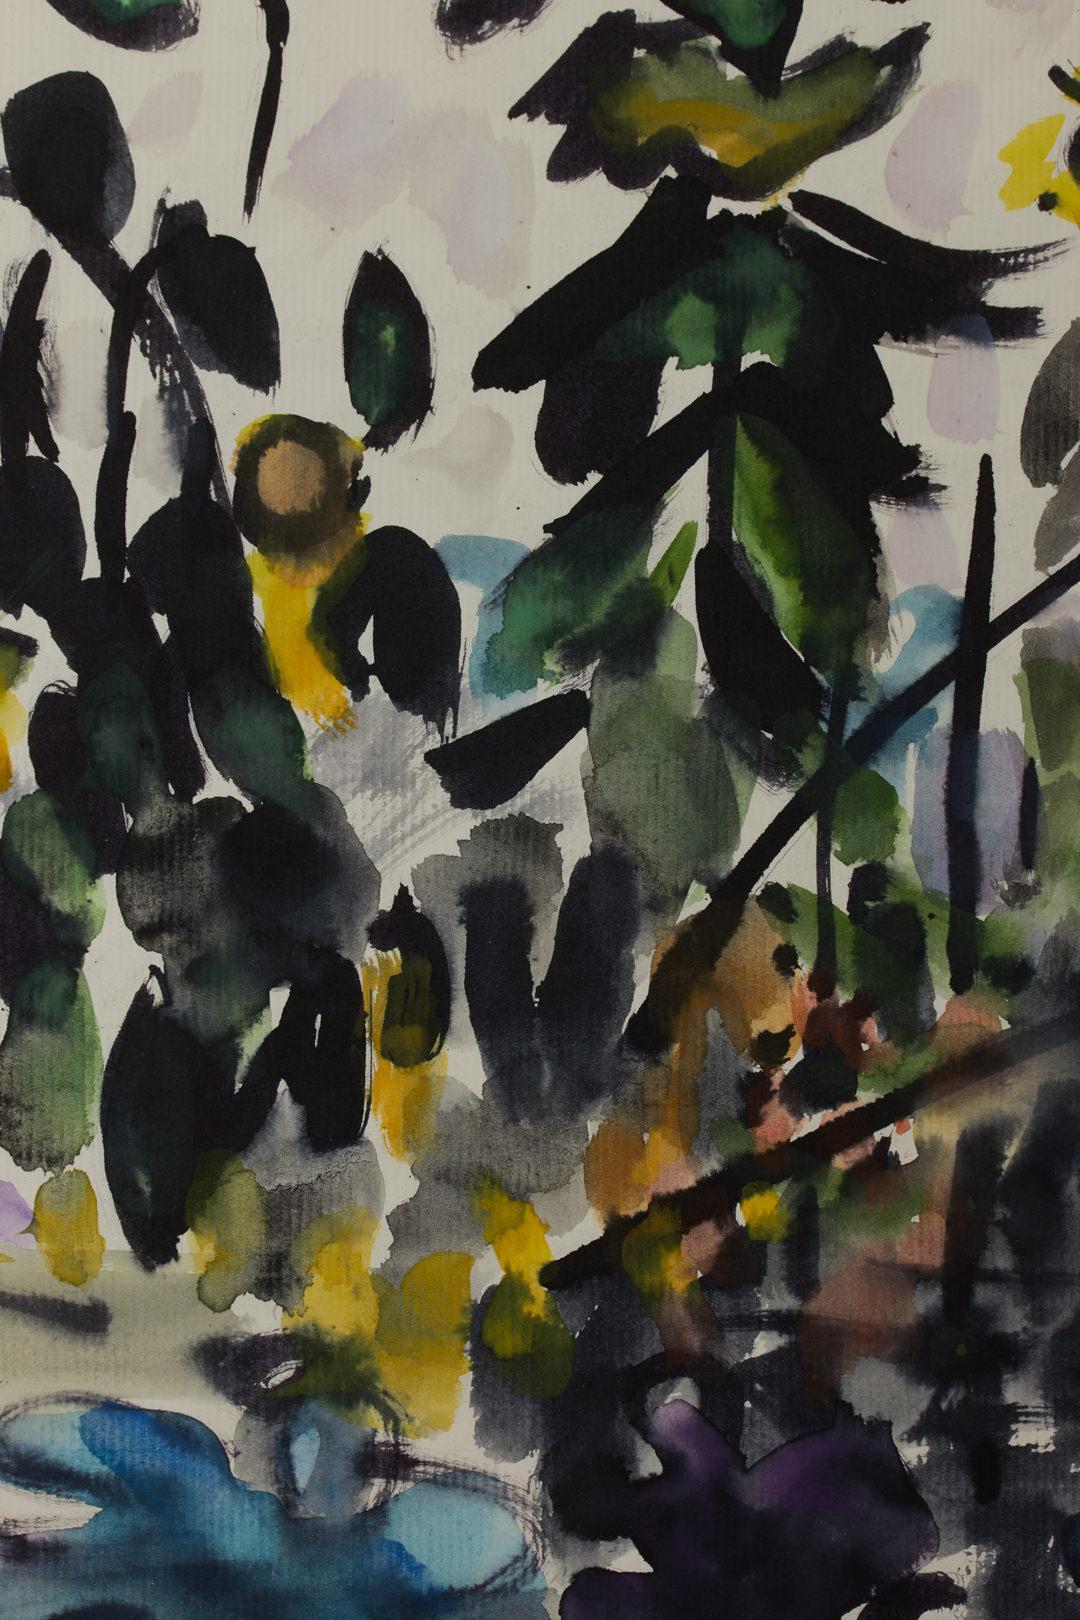 Work sold to benefit the CLEVELAND INSTITUTE OF ART

Joseph B. O’Sickey (American, 1918–2013)
Sunflowers in Field
Watercolor on paper
Signed lower left
12.5. x 19 inches

Joseph O'Sickey, born in Detroit in 1918, was a painter and teacher throughout